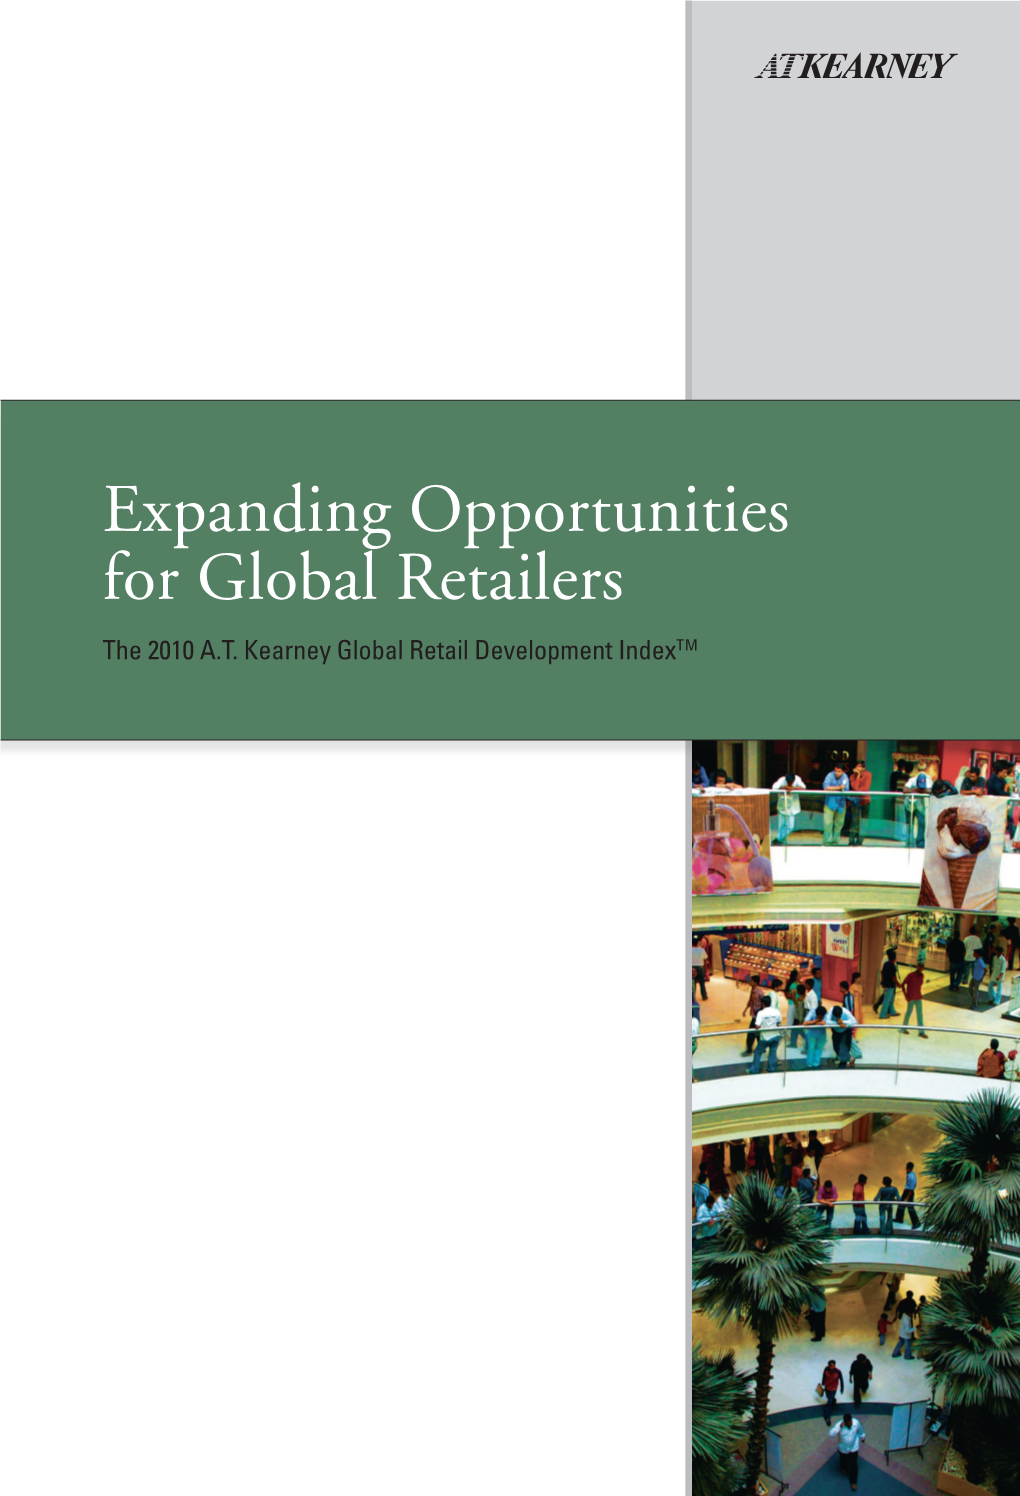 Expanding Opportunities for Global Retailers the 2010 A.T